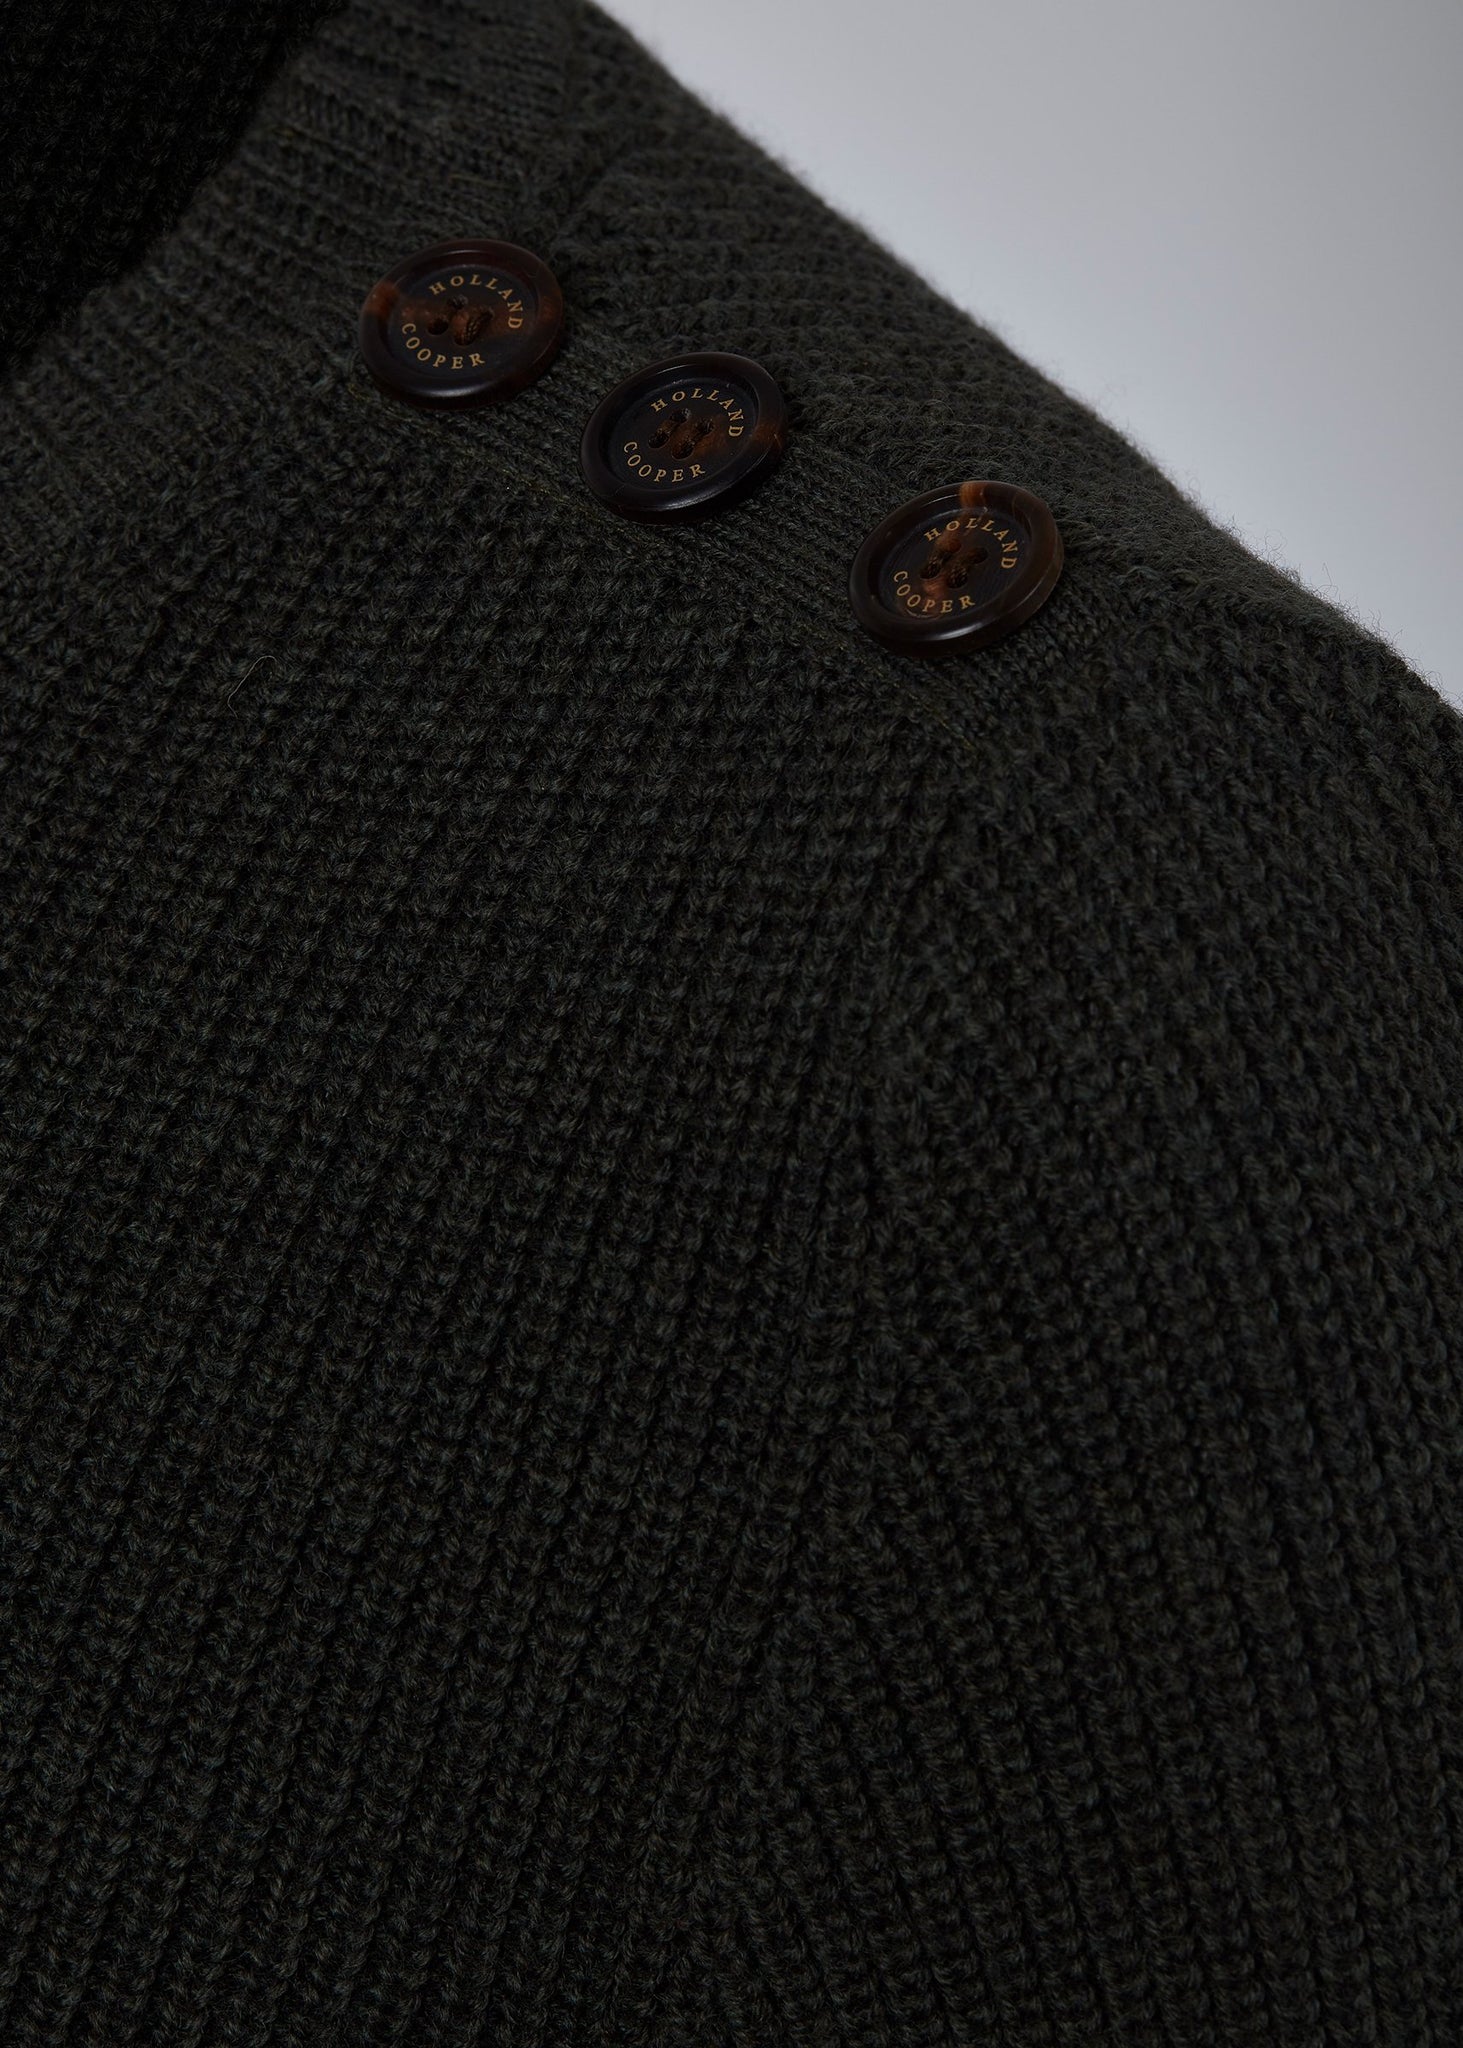 horn button detail across shoulders of classic crew neck slim fit merino wool jumper in forest green with brown faux suede gunpatch on shoulder and quilted elbow patches in the same brown suede material